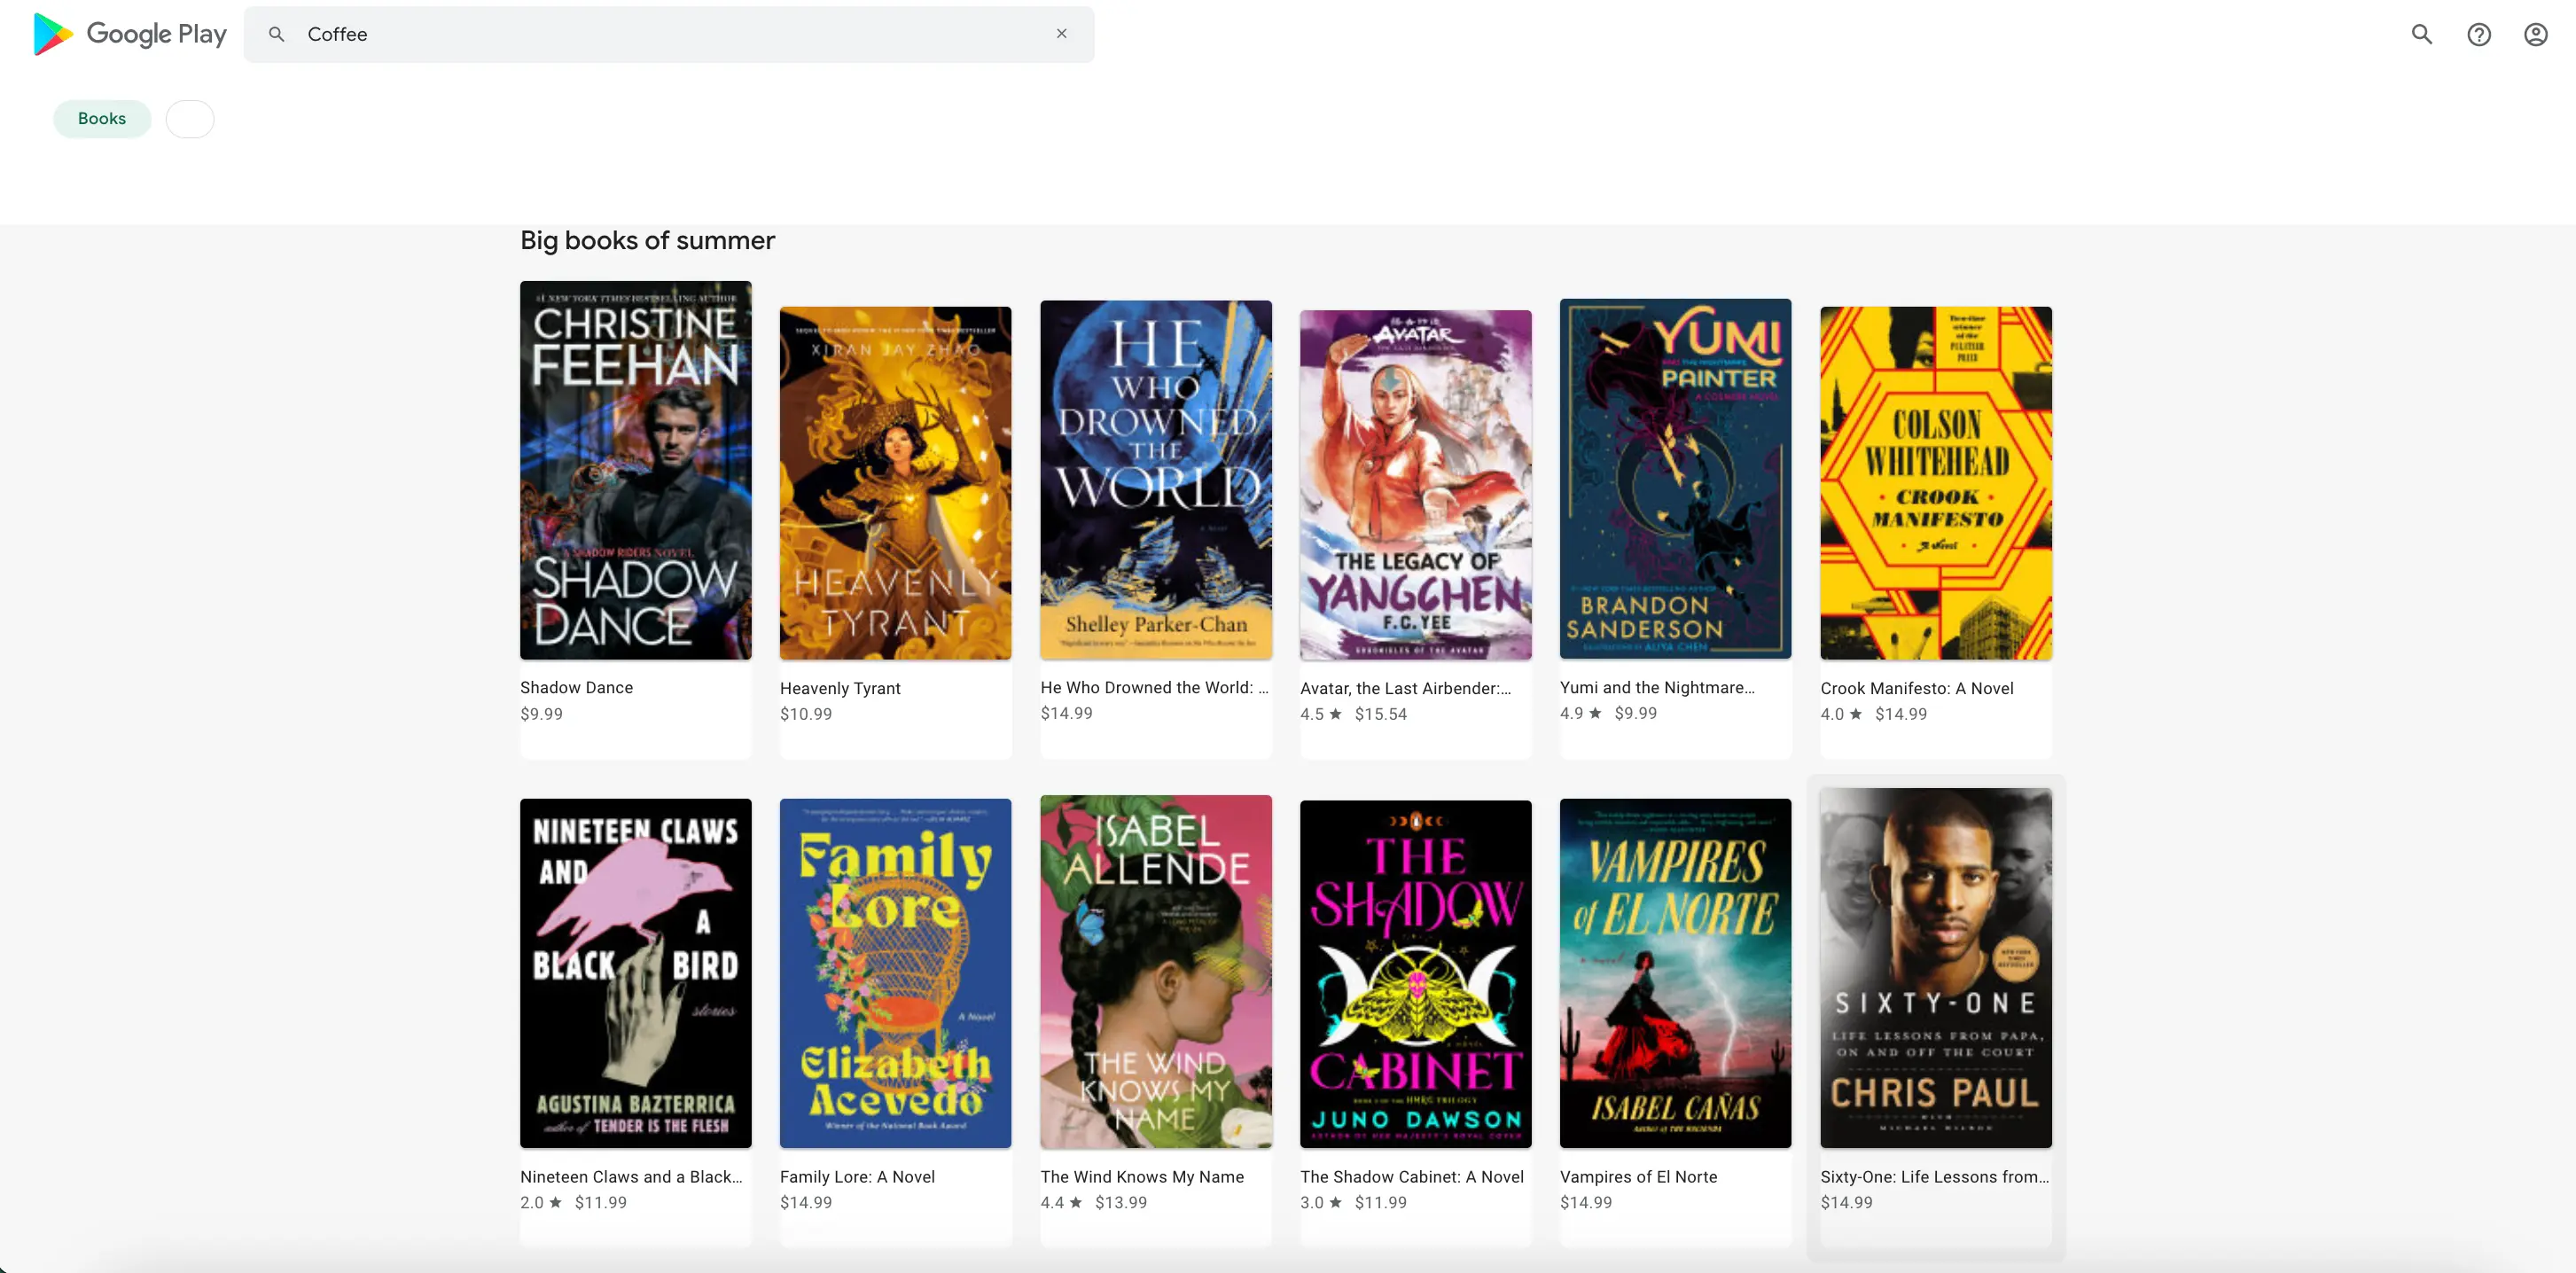 List Type Organic results overview for Google Play Books with section_page_token(Plain Search)